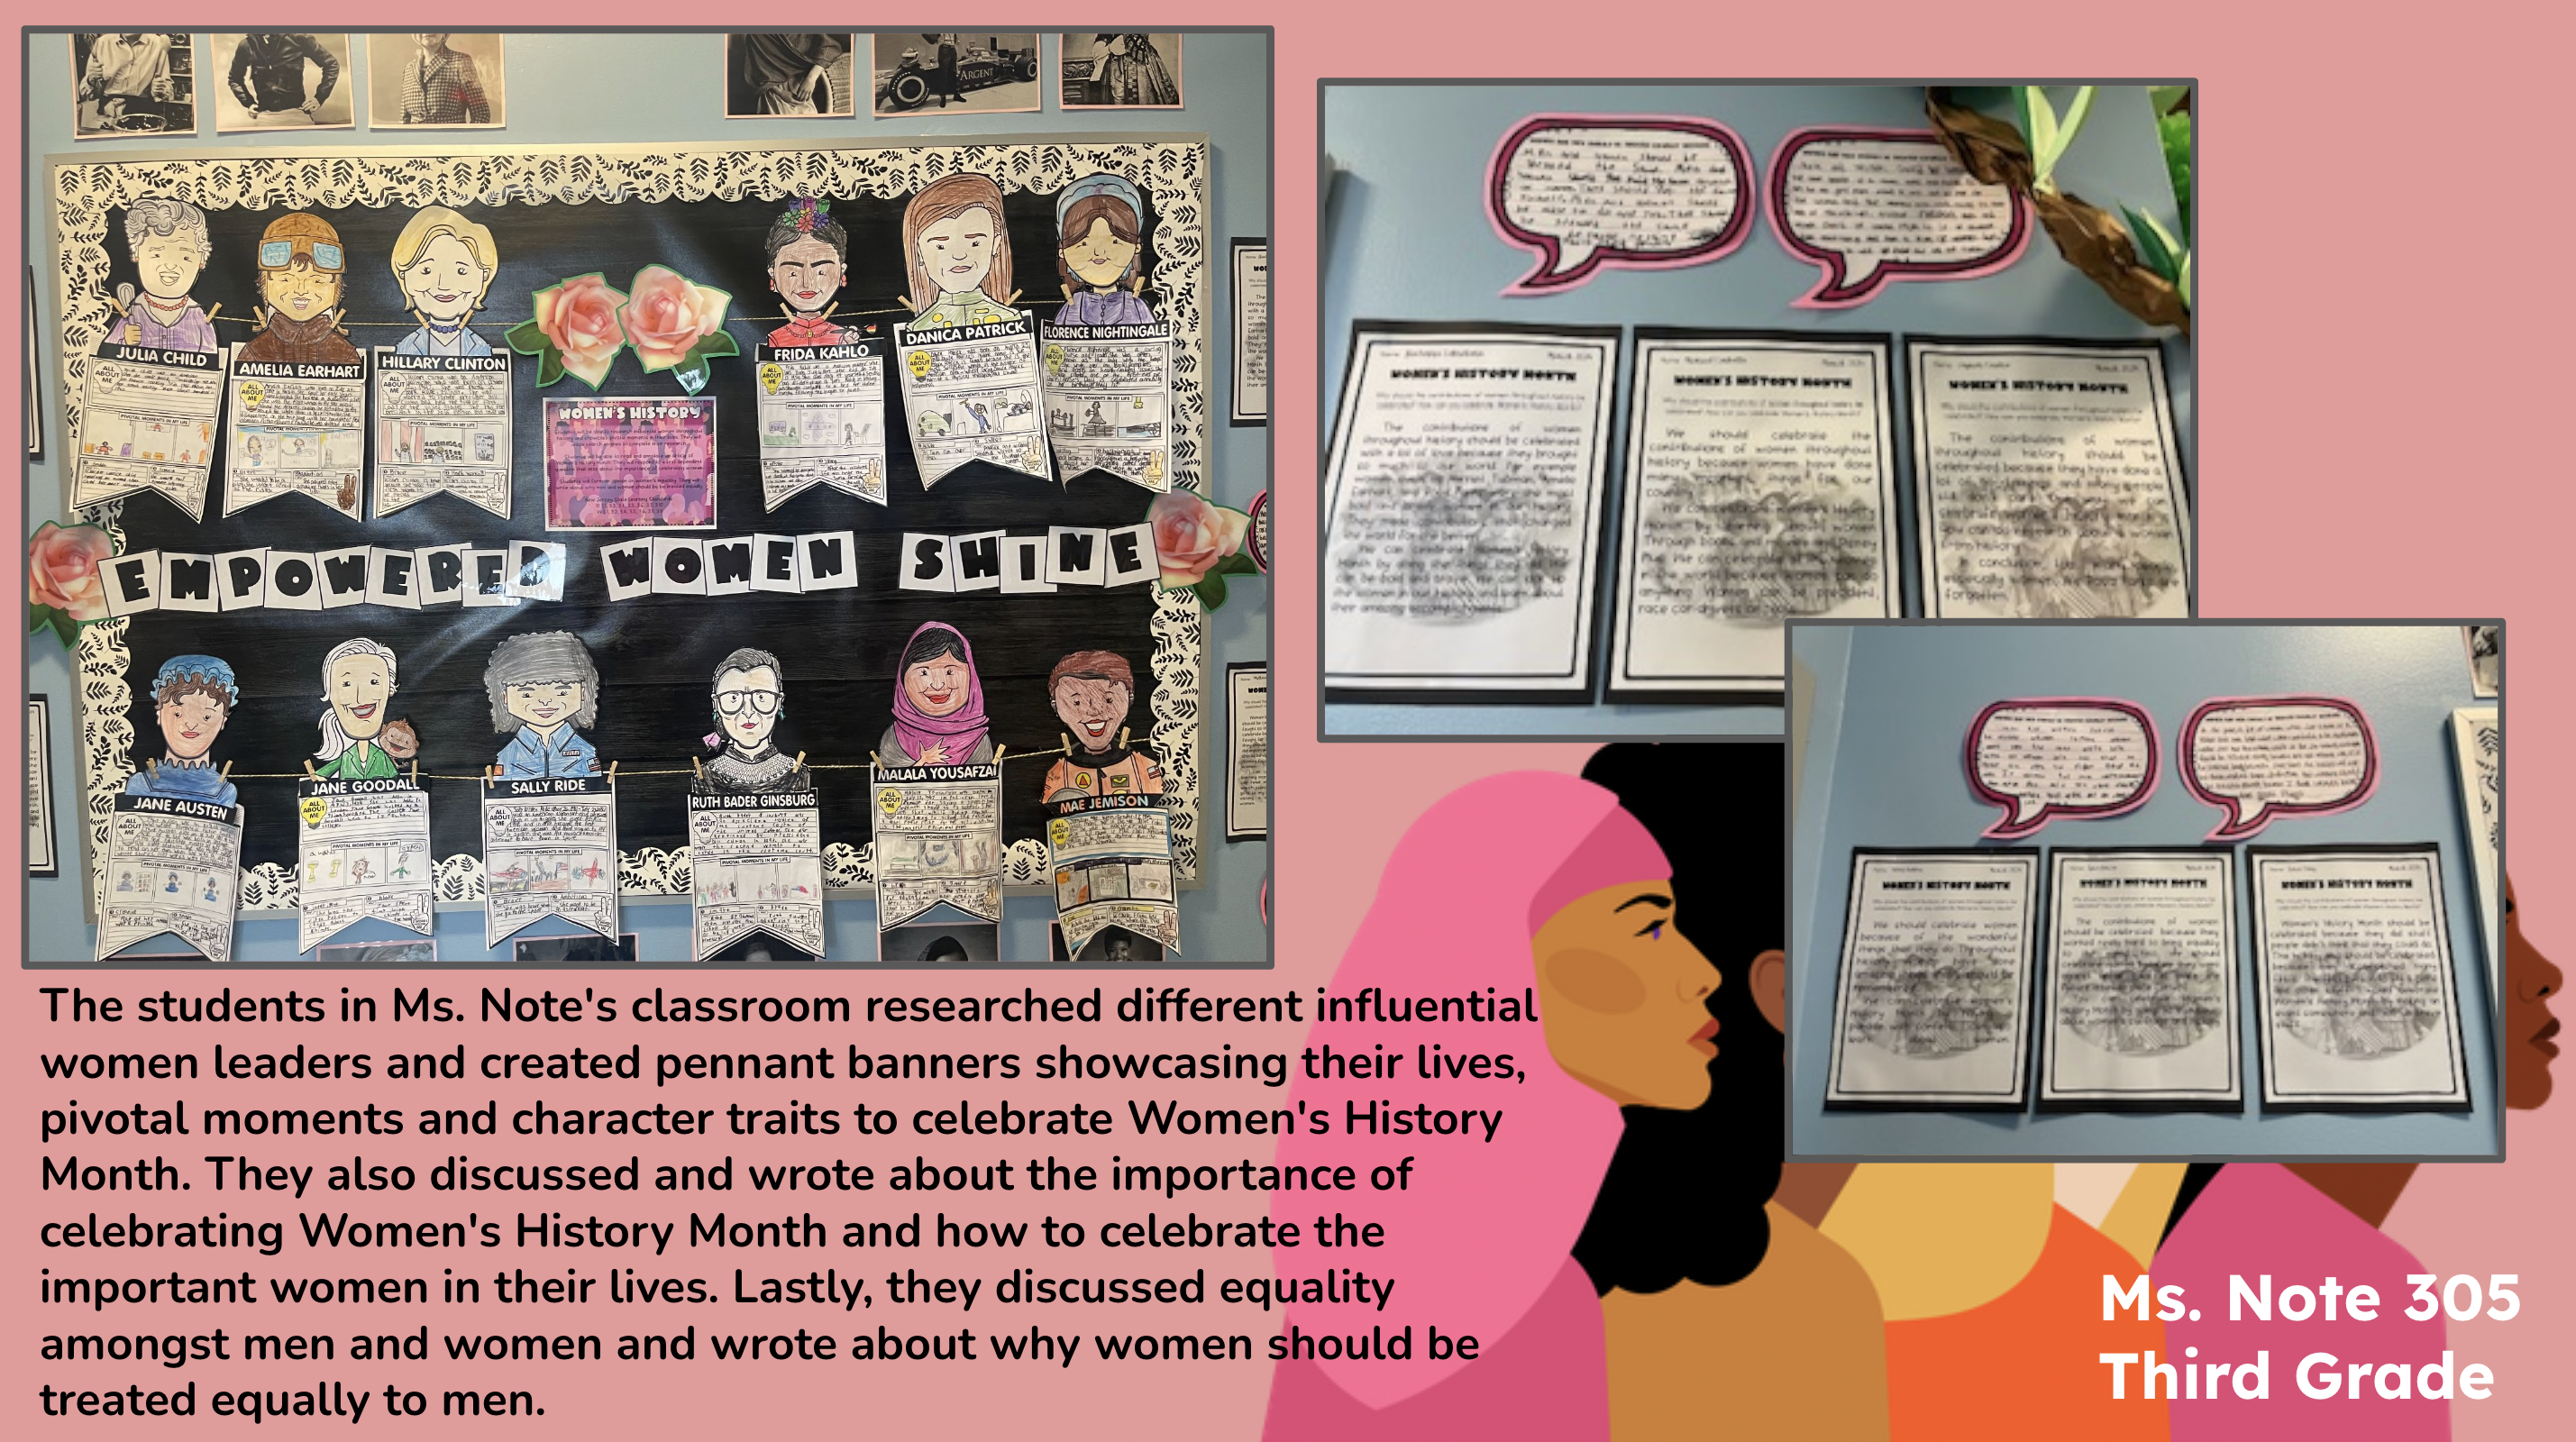 Celebrating Women's History Month at the Hudson School